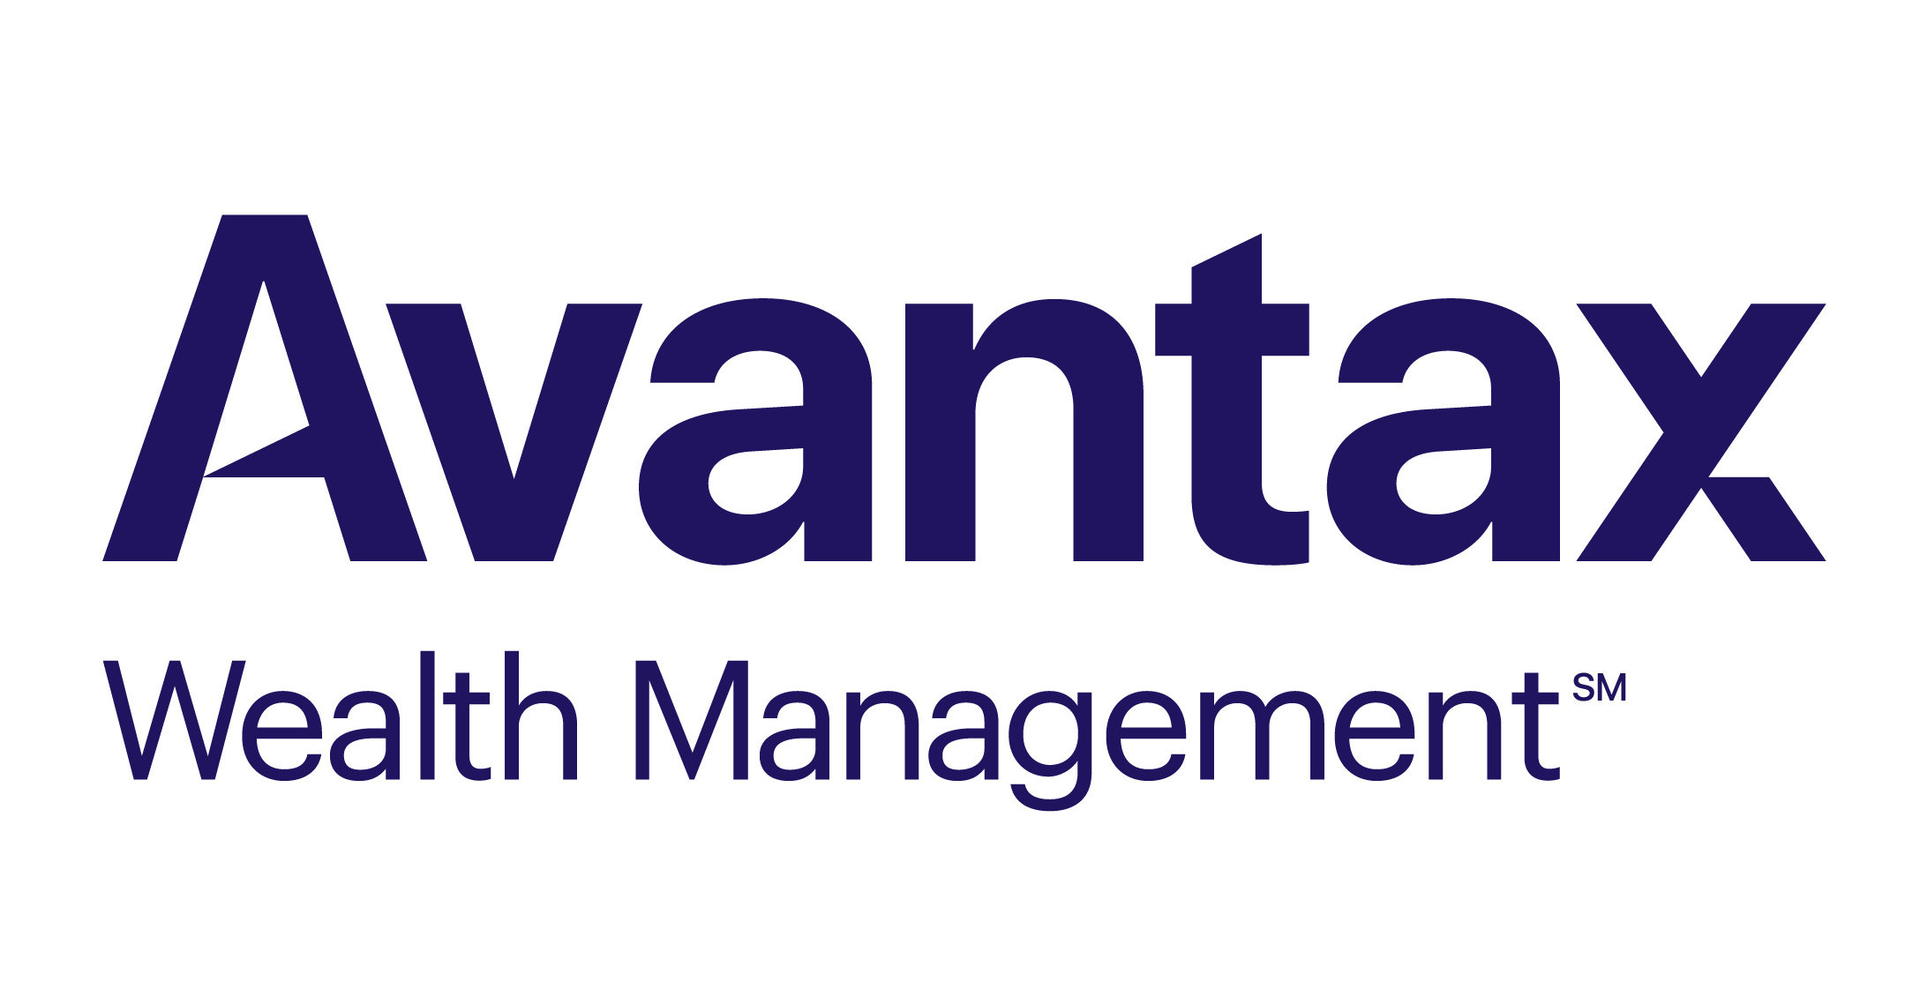 Financial Services Rebrands as Avantax Planning Partners, Keeping Same Powerful Value Proposition for Accounting Firms